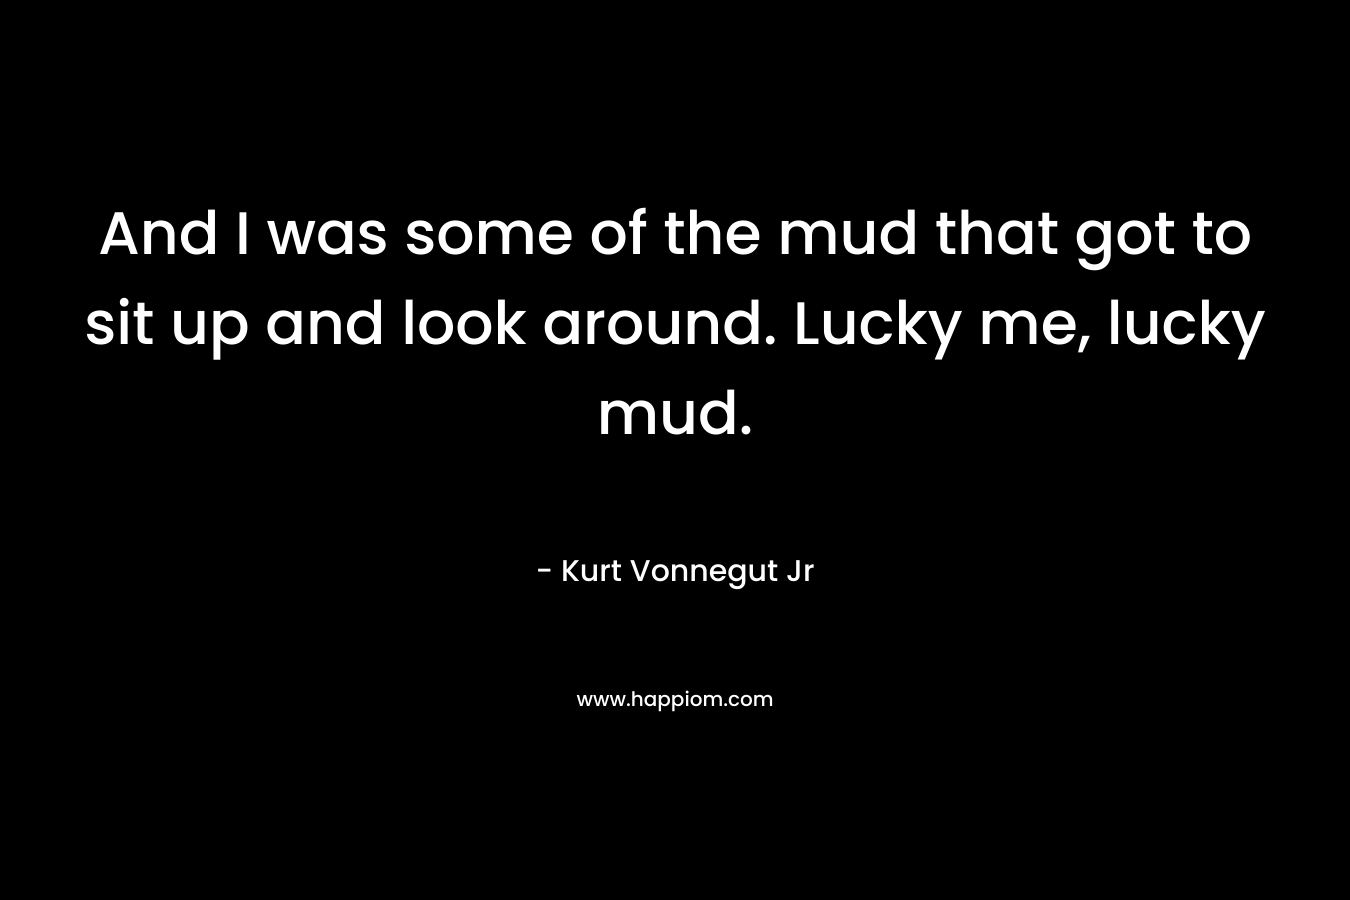 And I was some of the mud that got to sit up and look around. Lucky me, lucky mud.